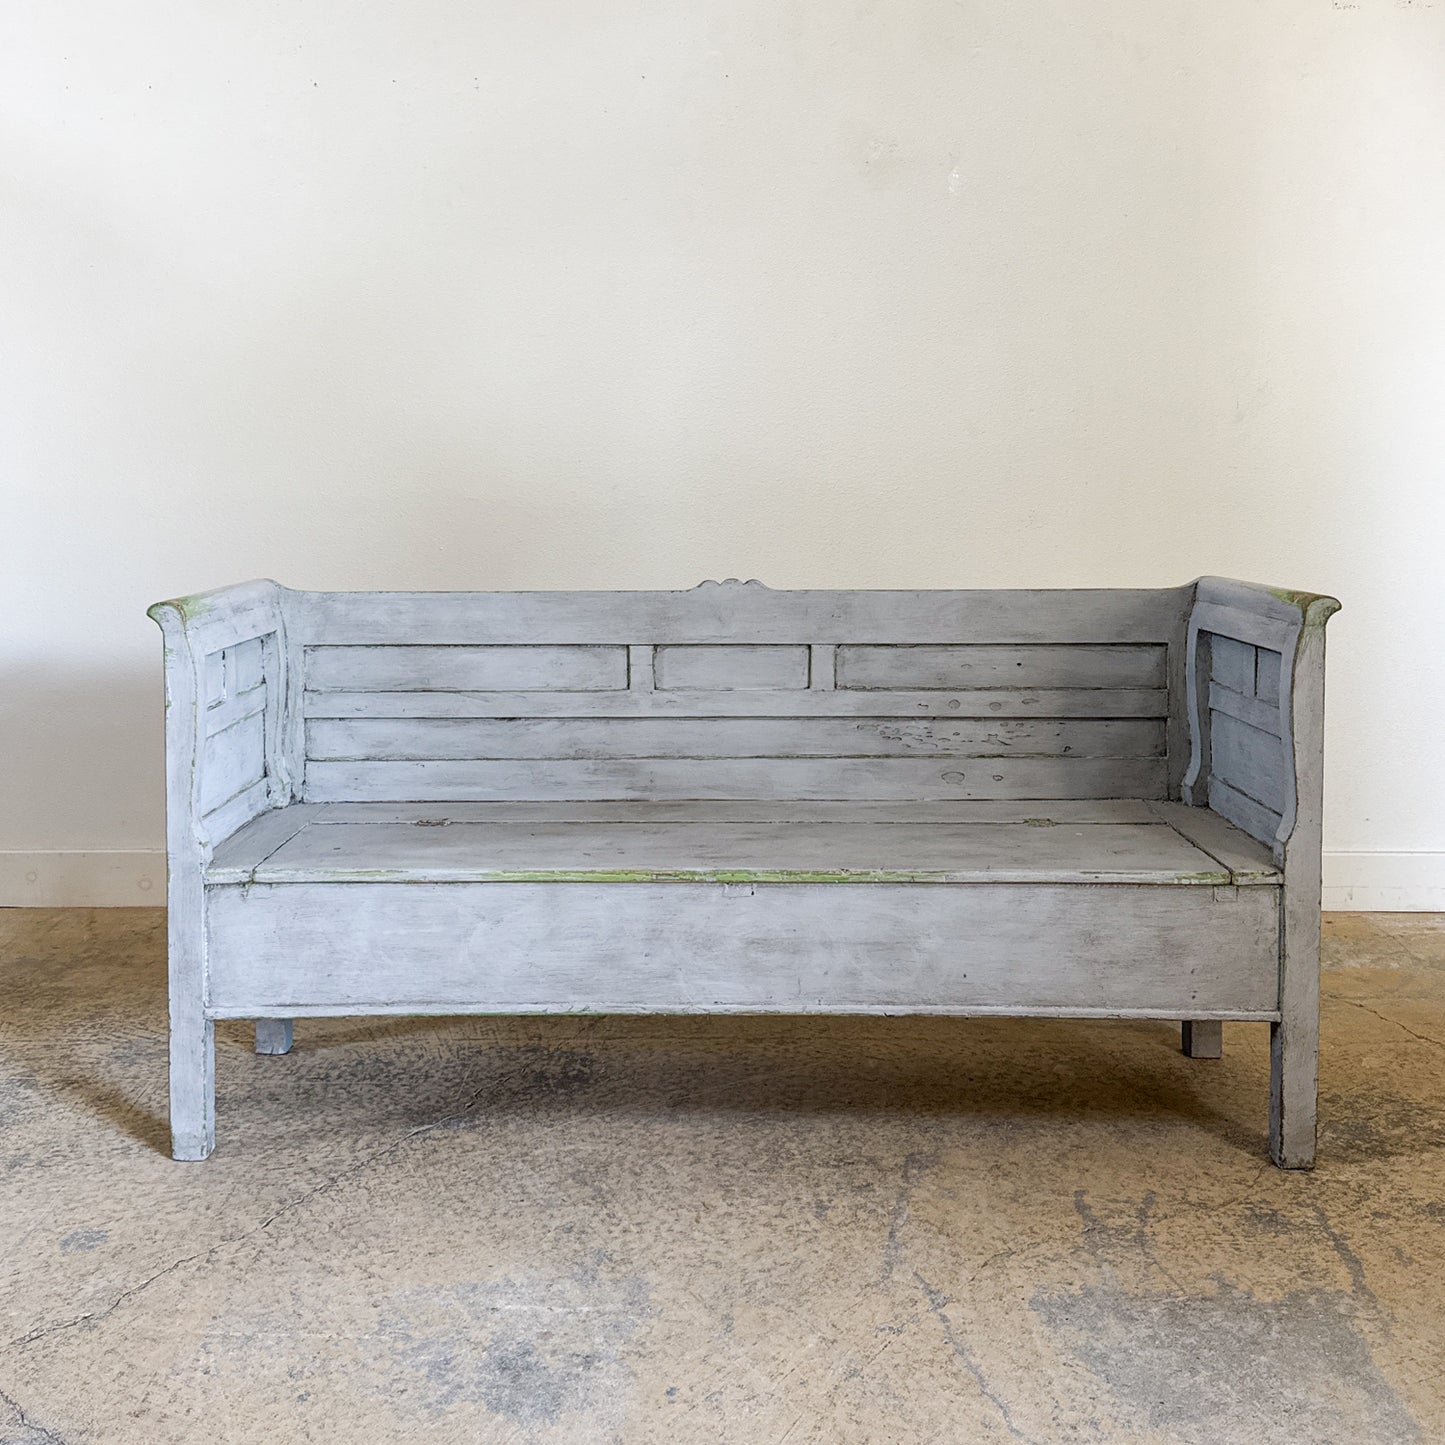 Antique Painted European Bench with Storage